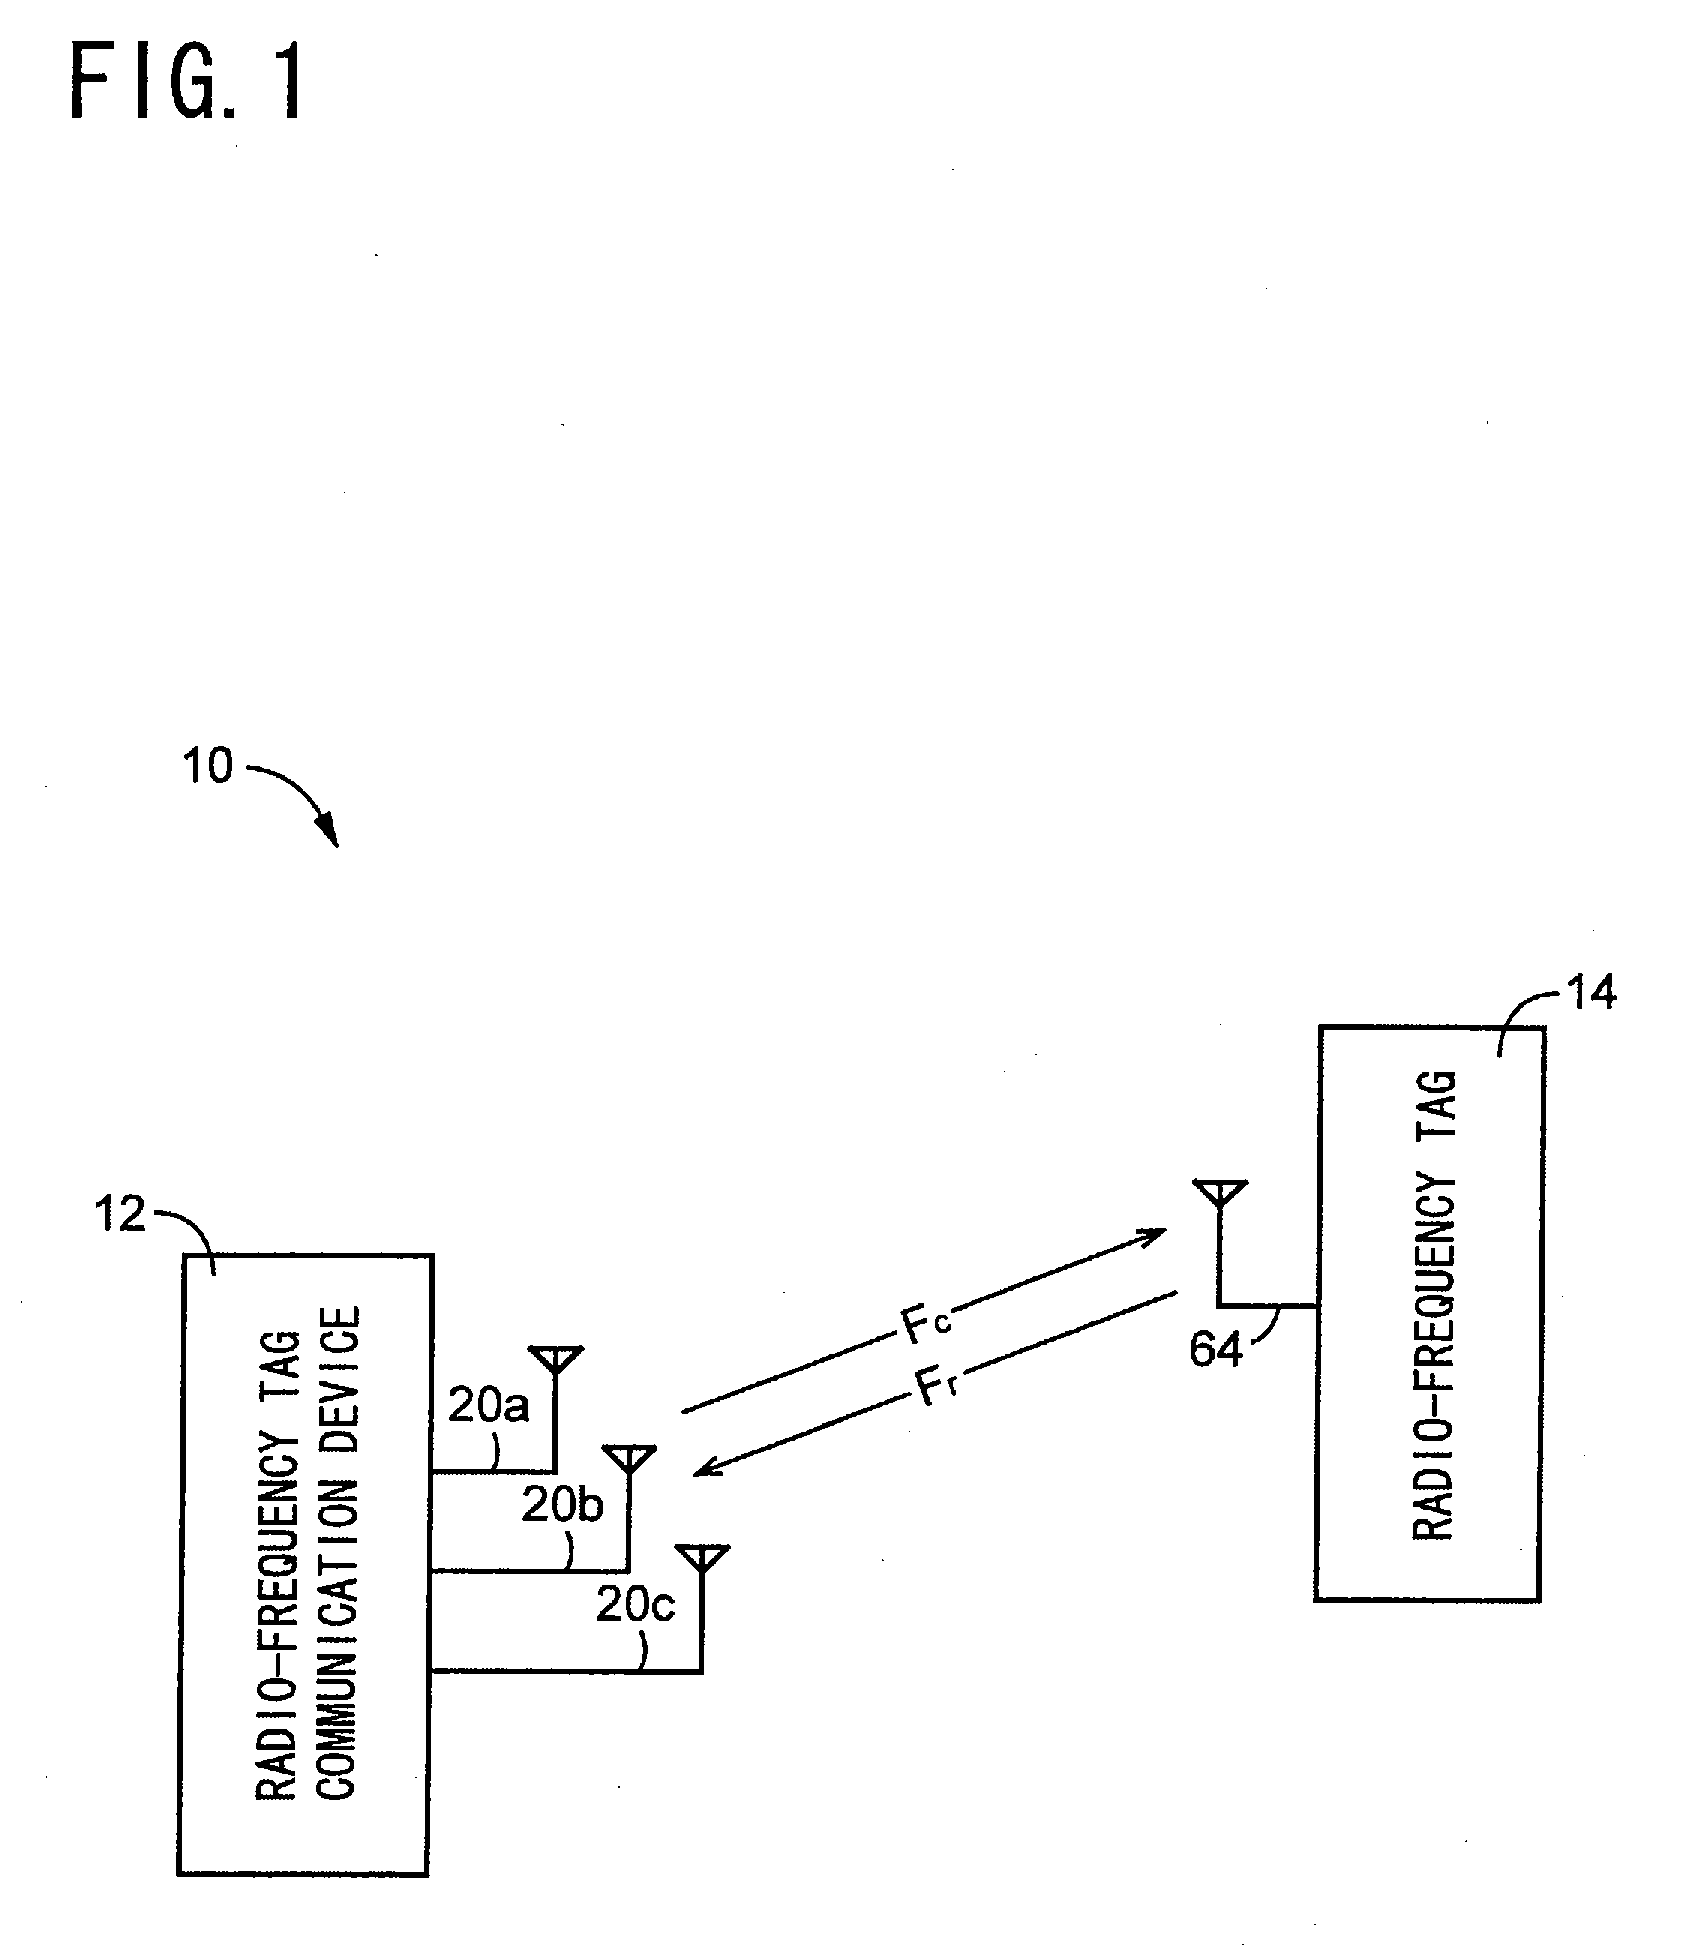 Radio-frequency communication device